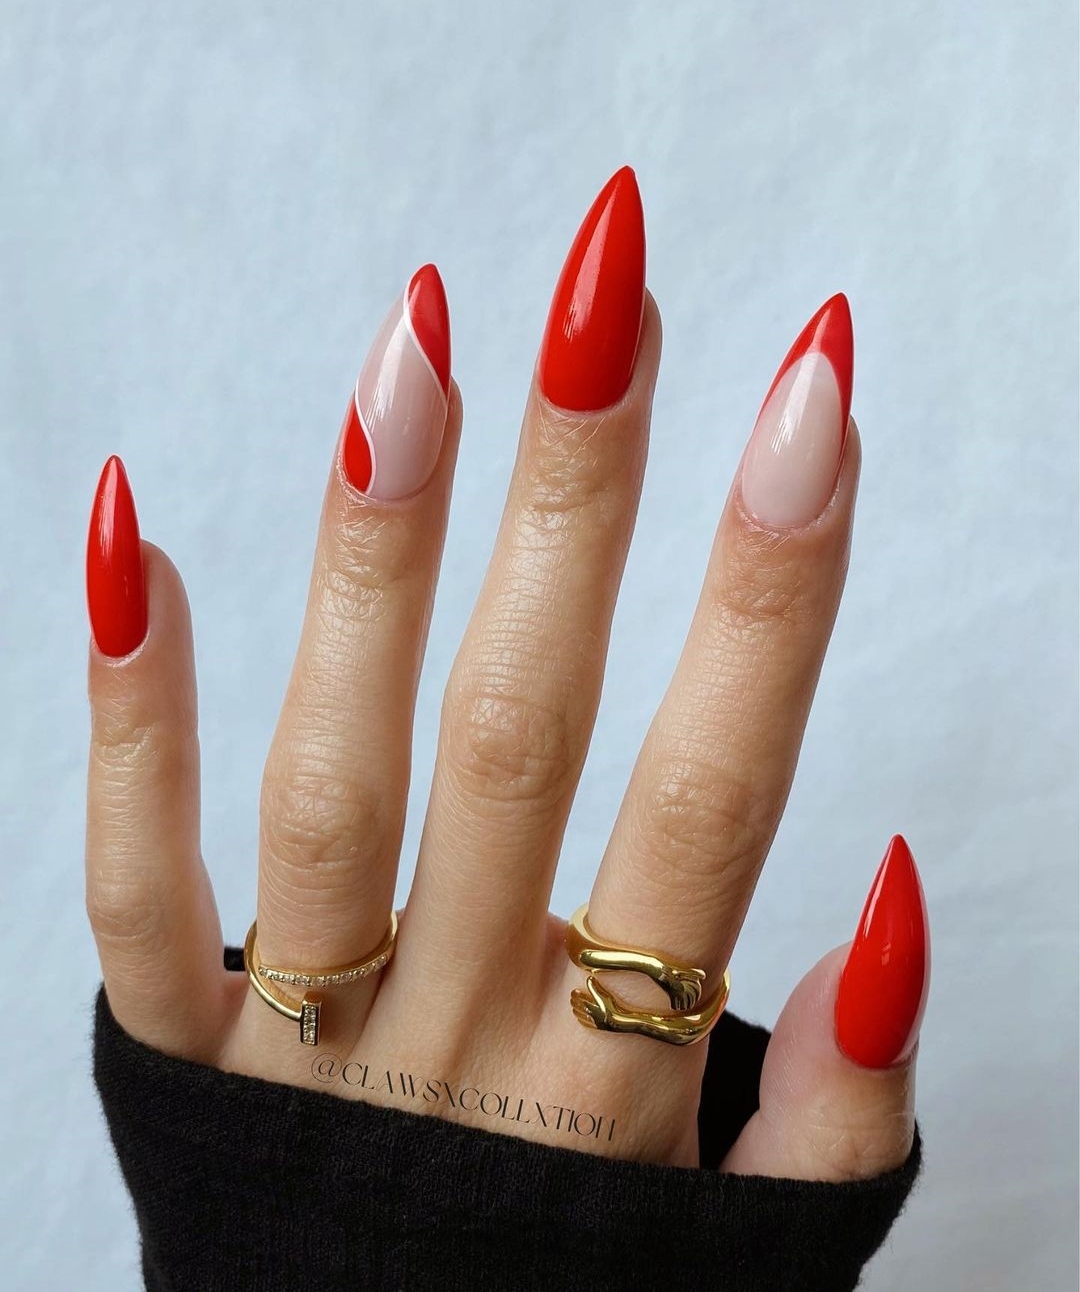 Long Red Stiletto Nails with French Tips